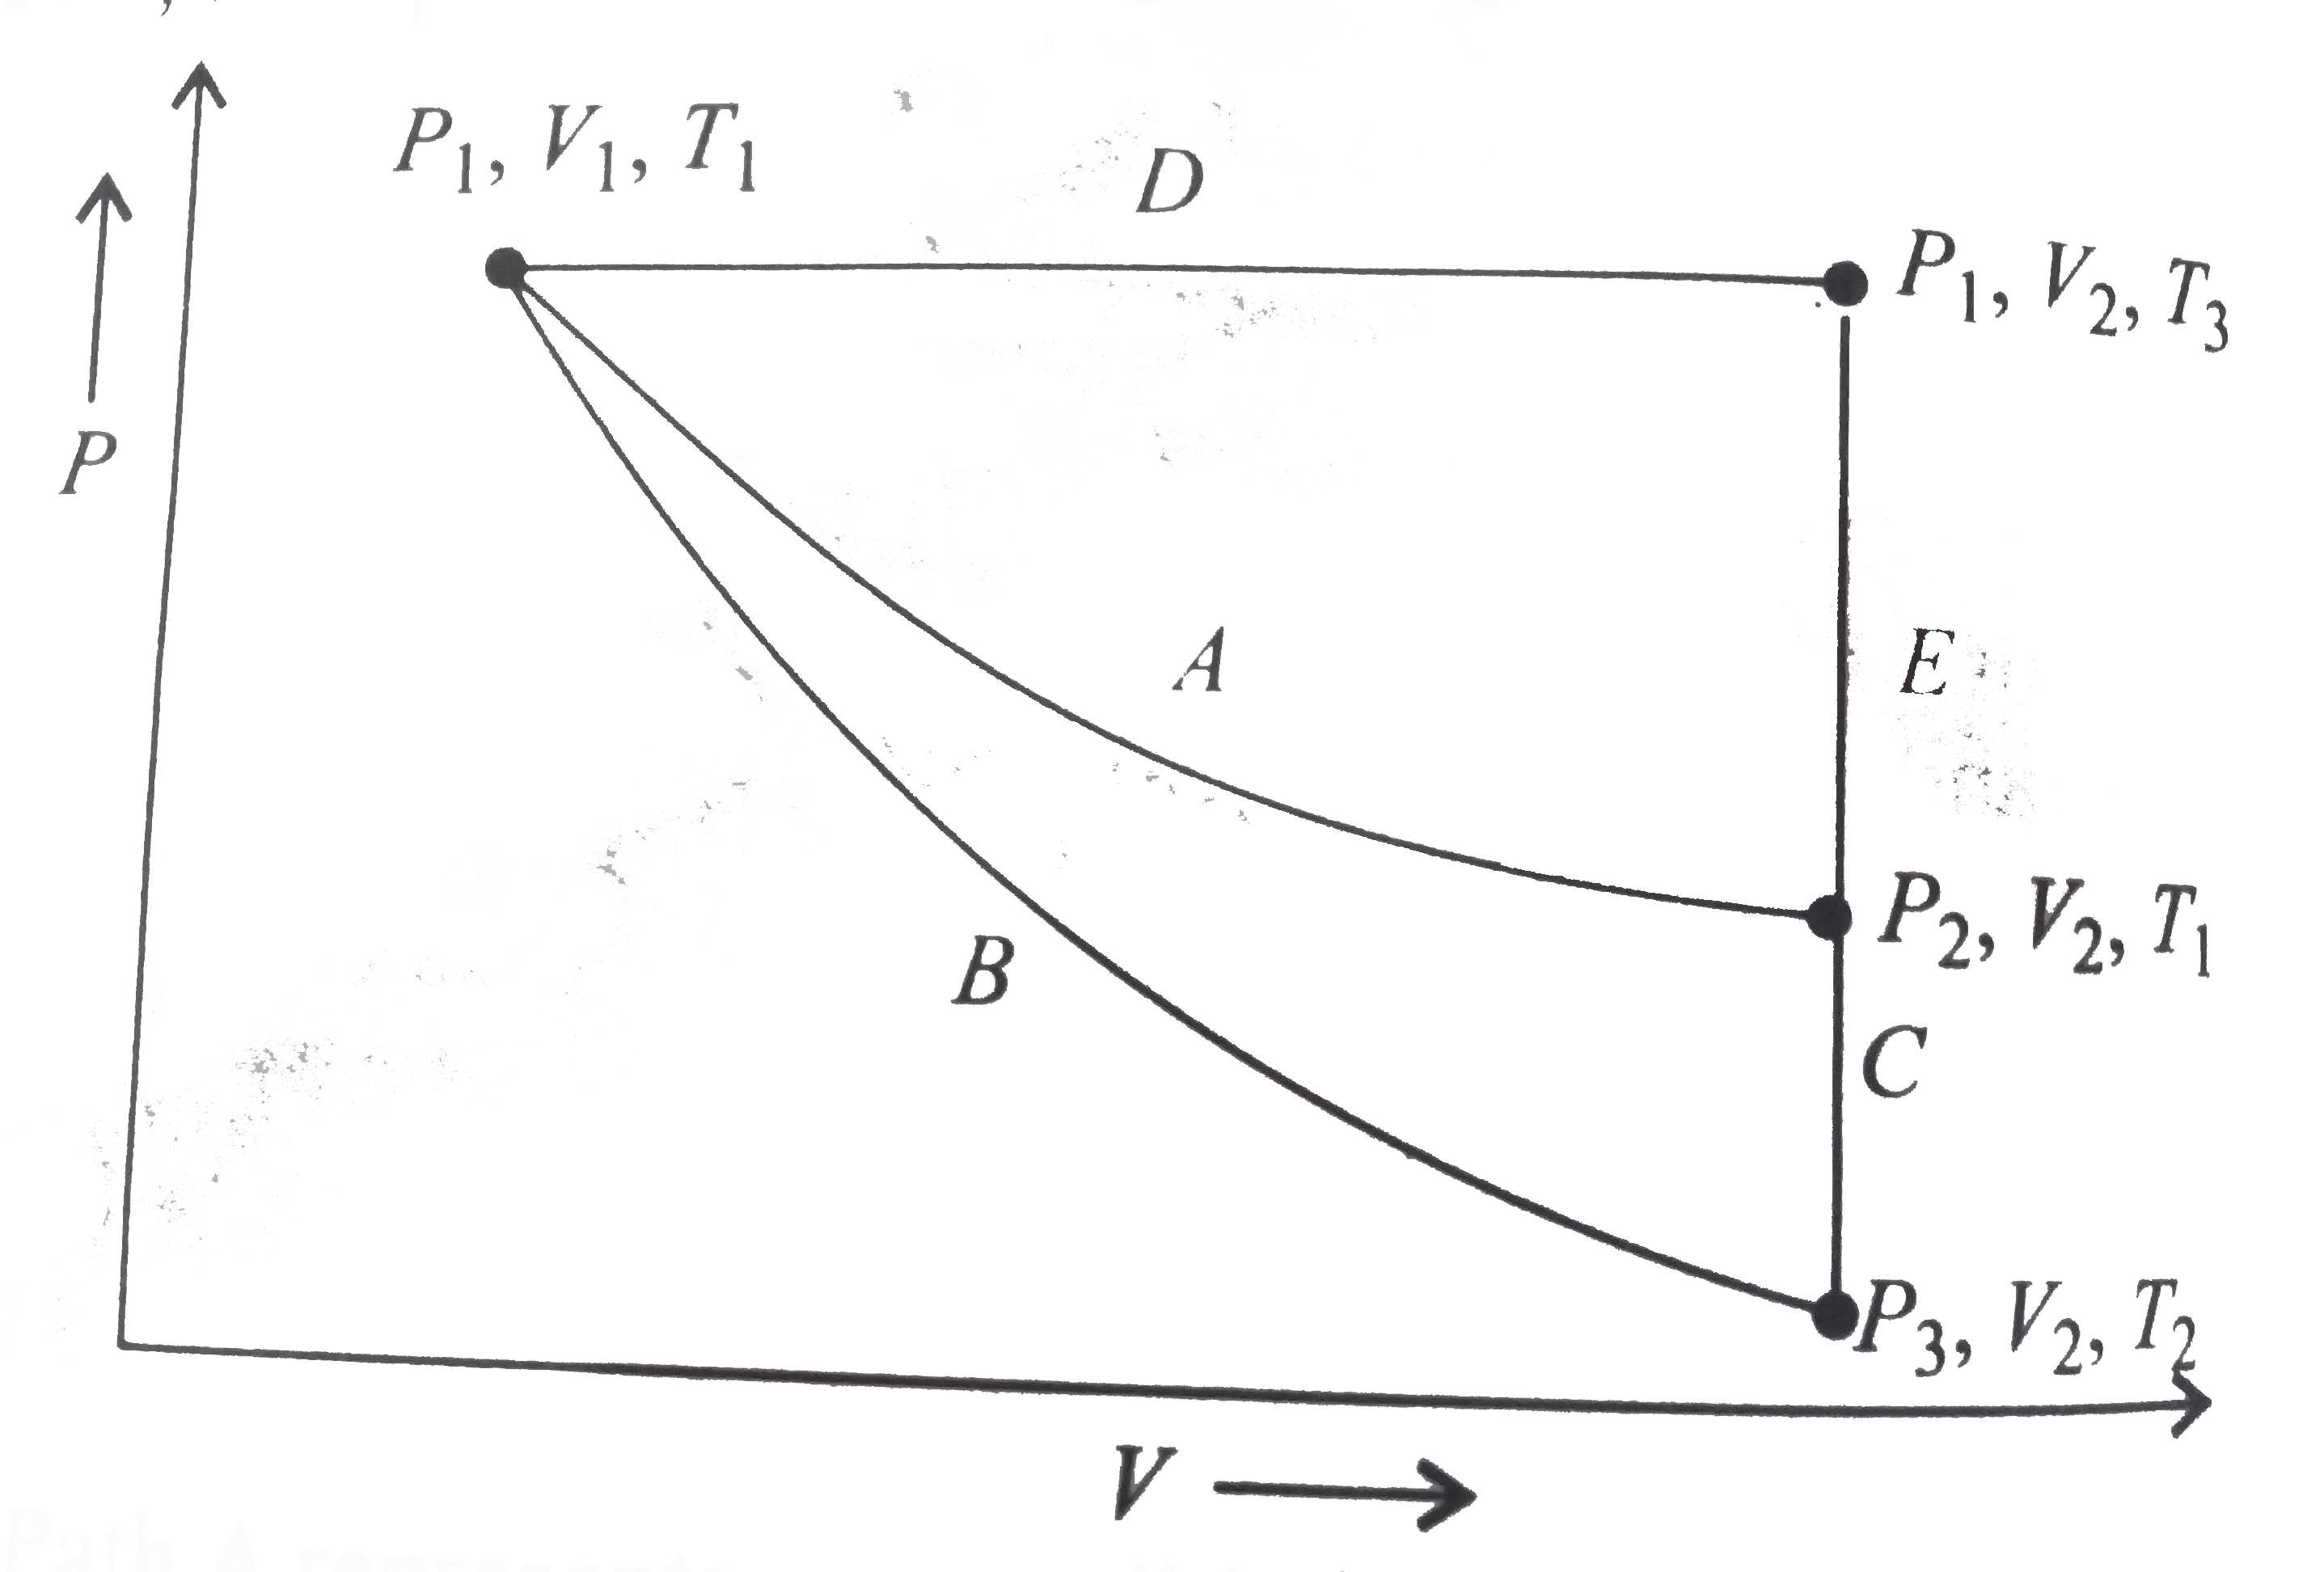 For an ideal gas, an illustratio of three different paths A(B+C) and (D+E) from an initial state P(1), V(1), T(1) to a final state P(2), V(2),T(1) is shown in the given figure.      Path Arepresents a reversible isothermal expansion form P(1),V(1) to P(2),V(2), Path (B+C) represents a reversible adiabatic expansion (B) from P(1),V(1),T(1)to P(3),V(2),T(2) followed by reversible heating the gas at constant volume (C)from P(3),V(2),T(2) to P(2),V(2),T(1). Path (D+E) represents a reversible expansion at constant pressure P(1)(D) from P(1),V(1),T(1) to P(1),V(2),T(3) followed  by a reversible cooling at constant volume V(2)(E) from P(1),V(2),T(3) to P(2),V(2),T(1).   What is DeltaS for path (D +E)?